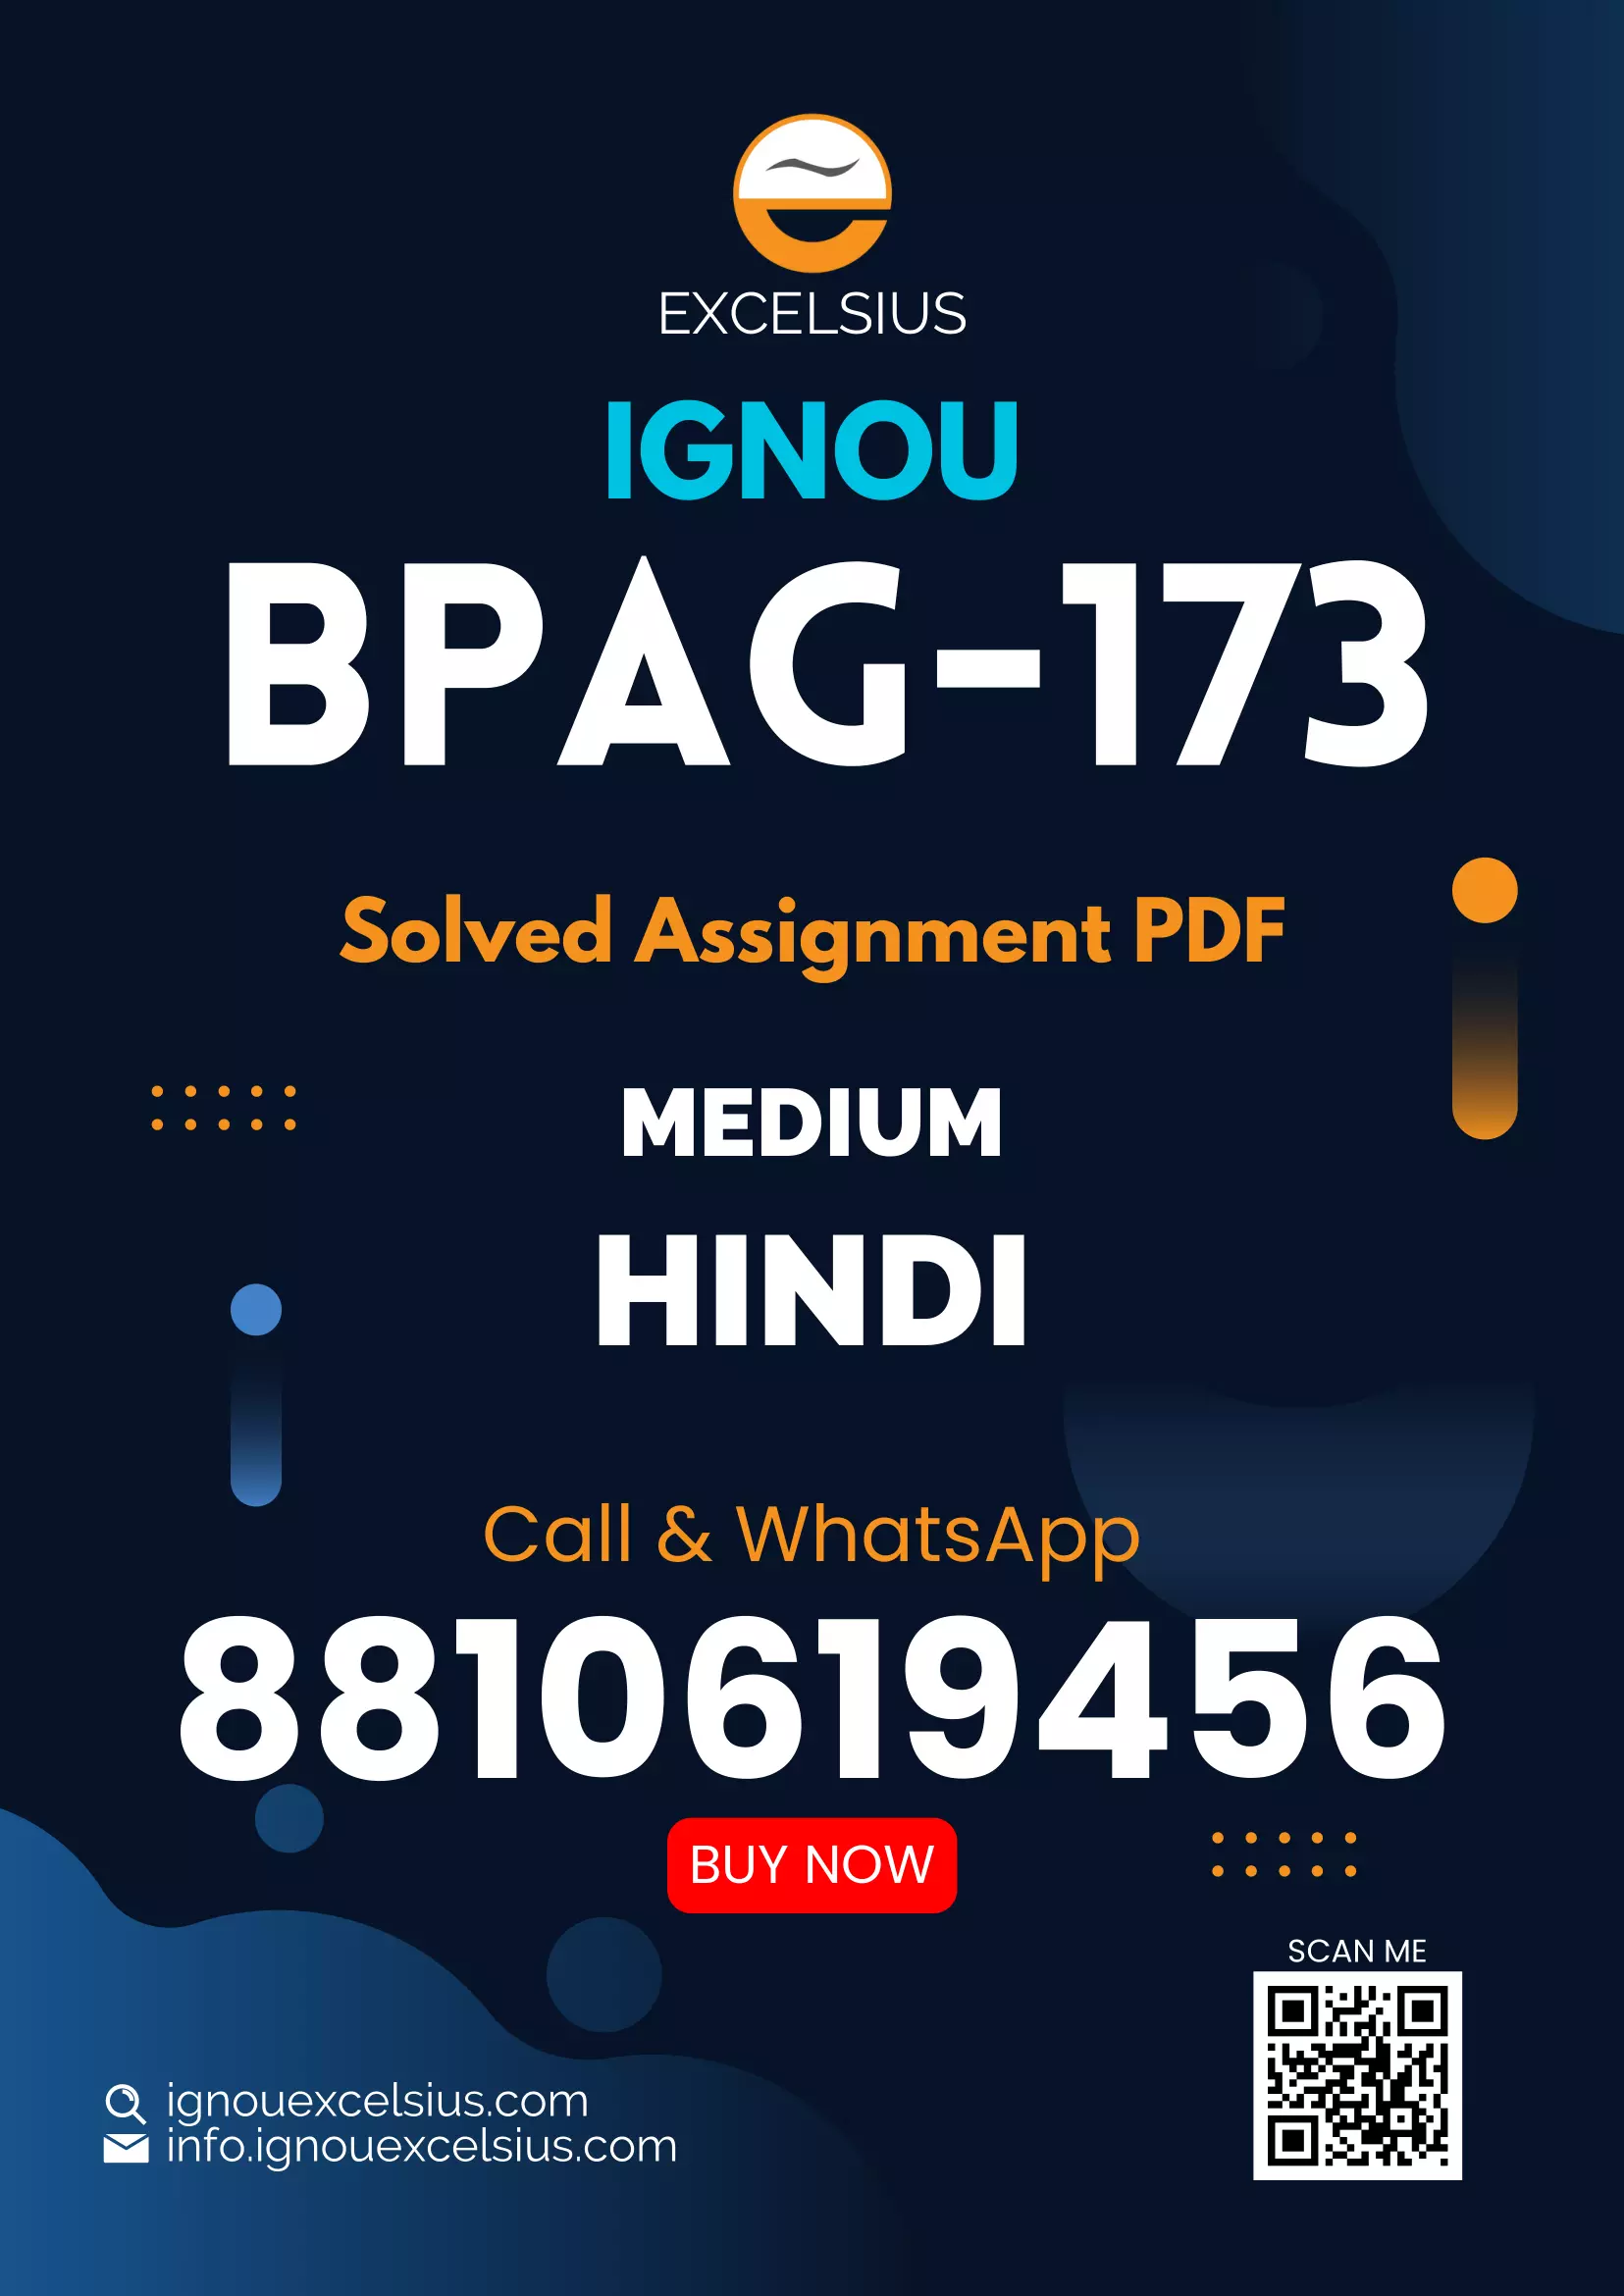 IGNOU BPAG-173 - E-Governance, Latest Solved Assignment-July 2022 – January 2023